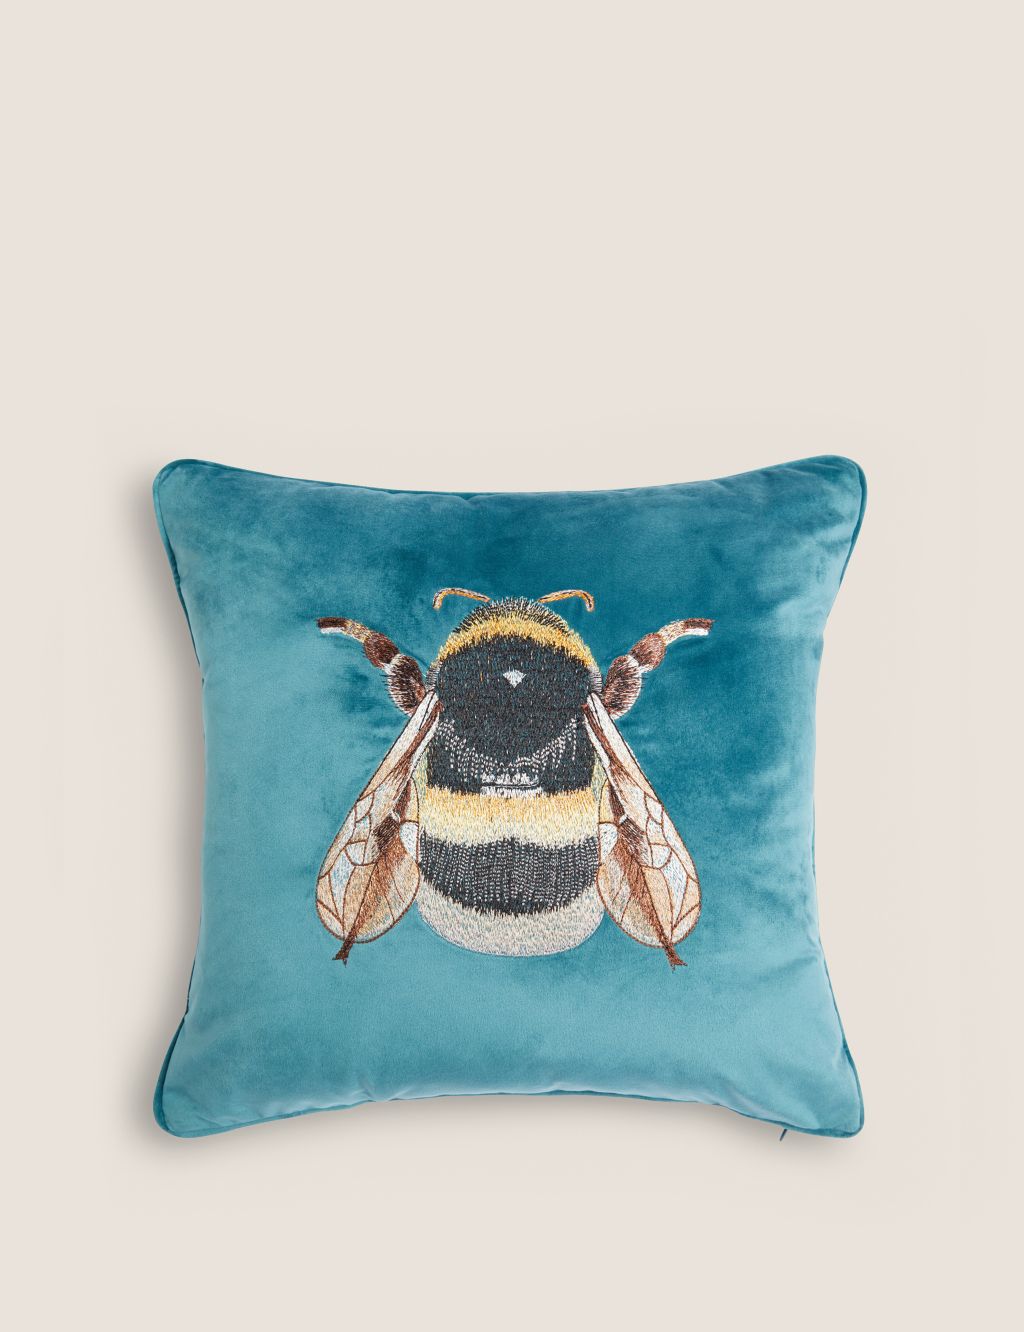 Velvet Bee Embroidered Cushion image 1